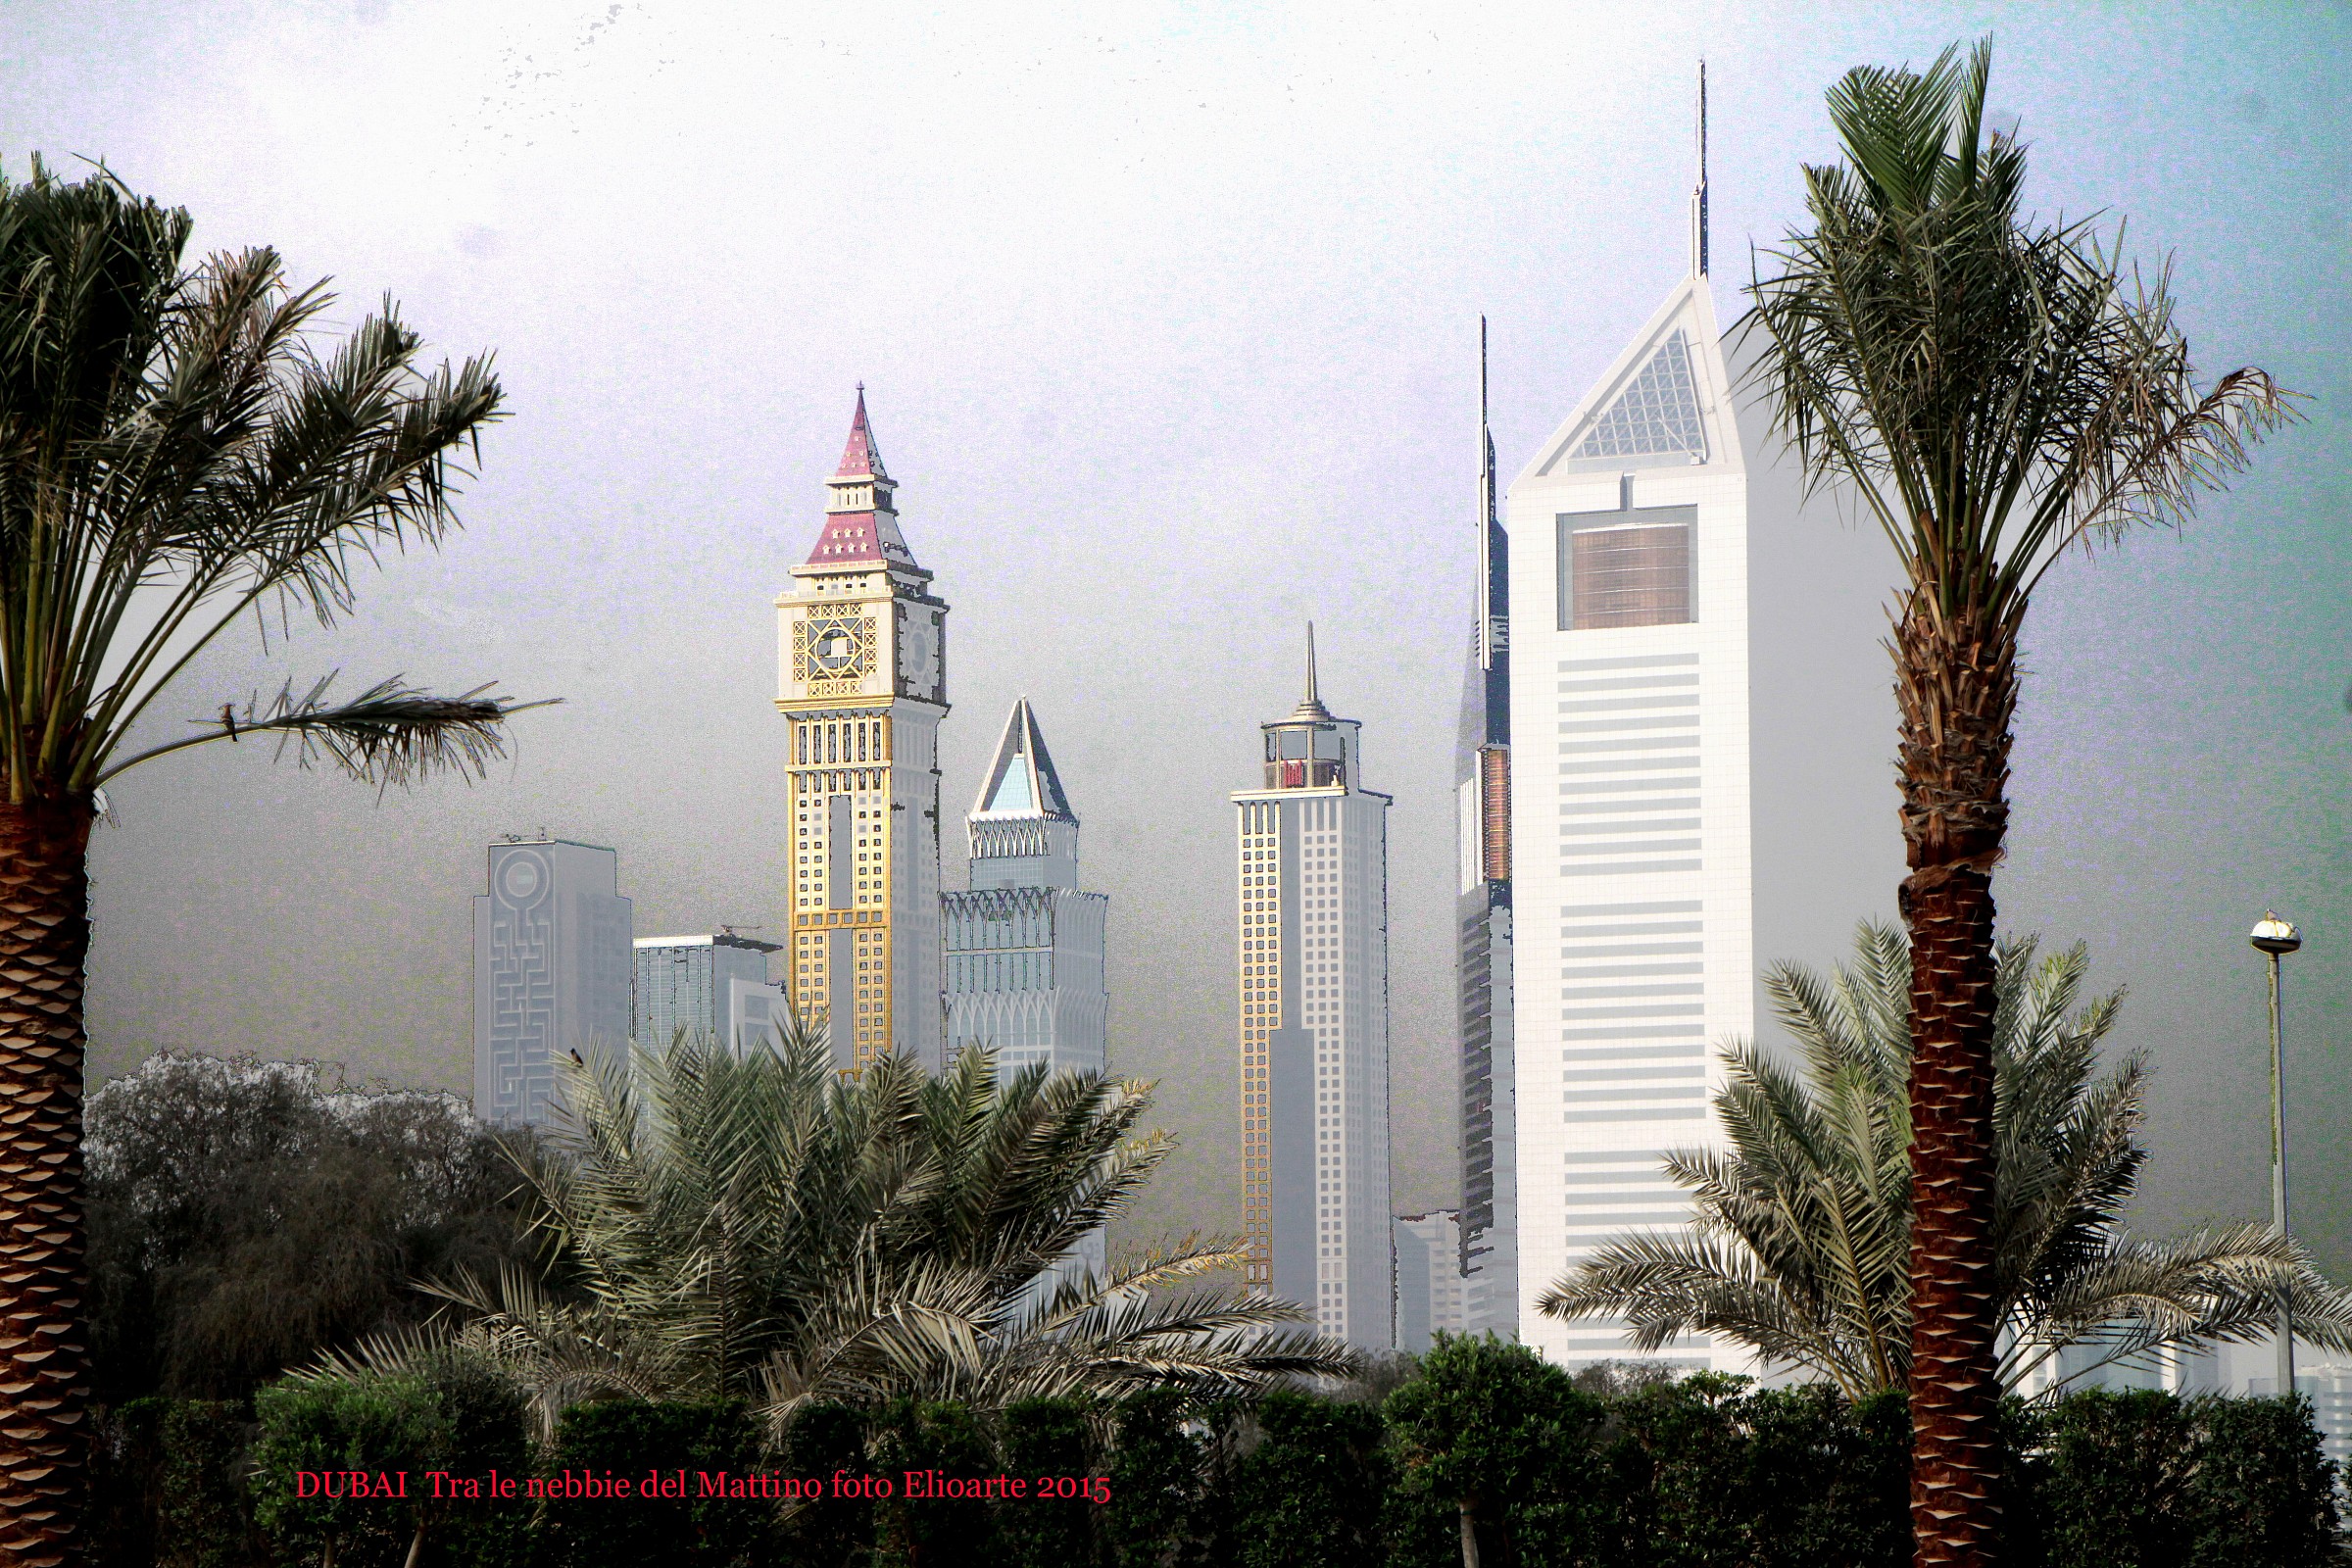 Through the mists of the morning in Dubai...